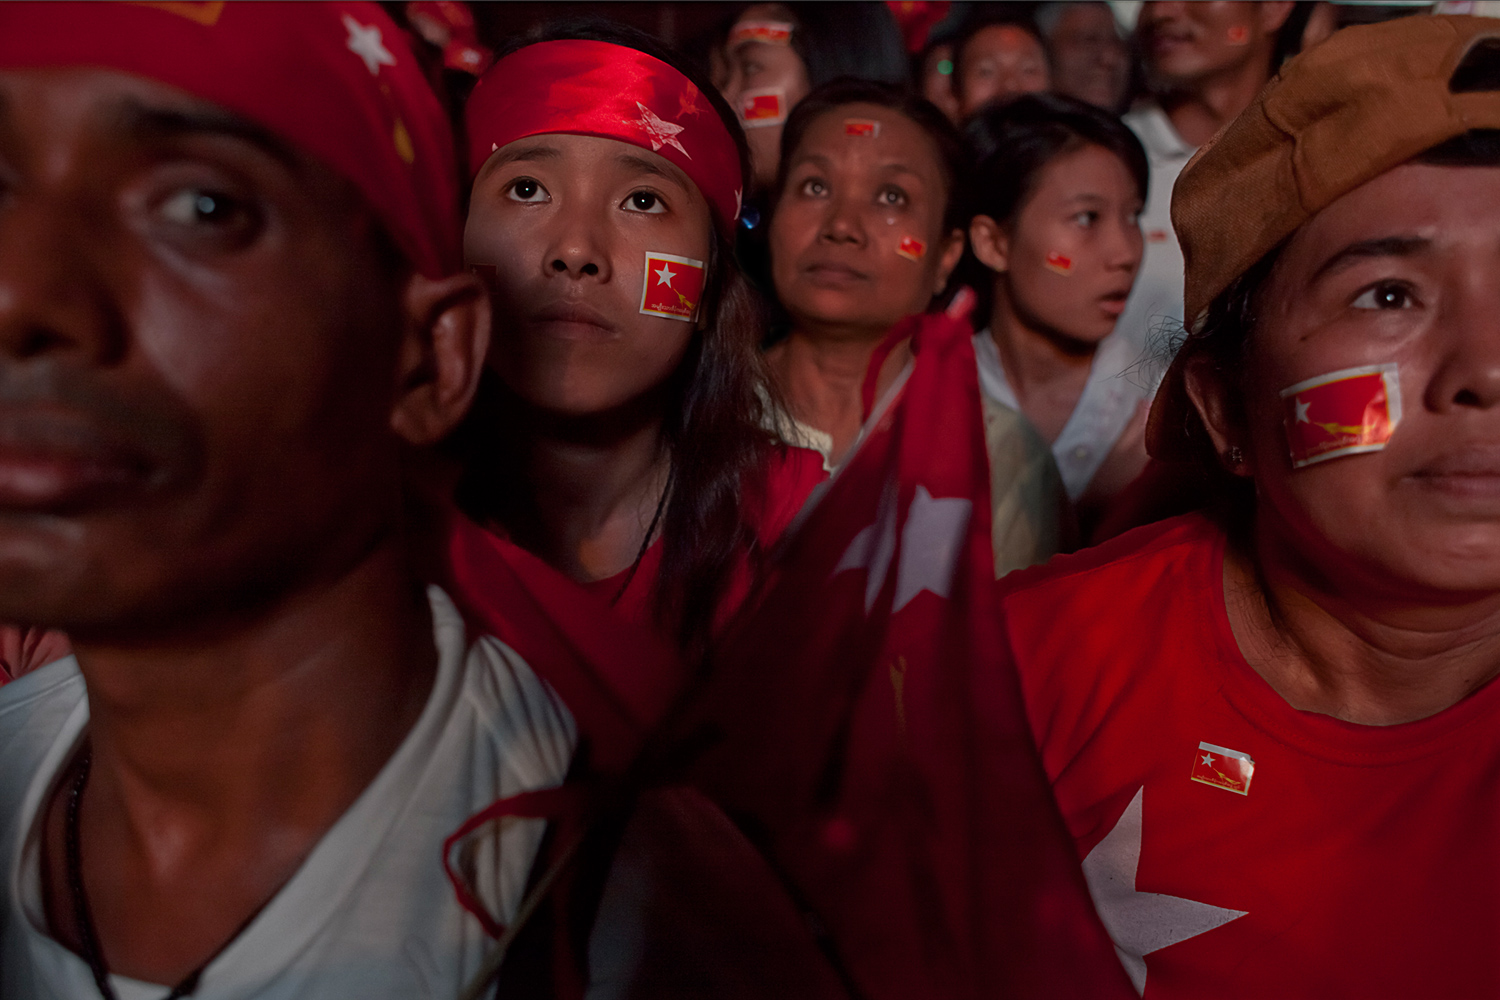 April 1, 2012. NLD supporters stay at party headquarters into the night, sometimes awaiting the vote count with suspense.